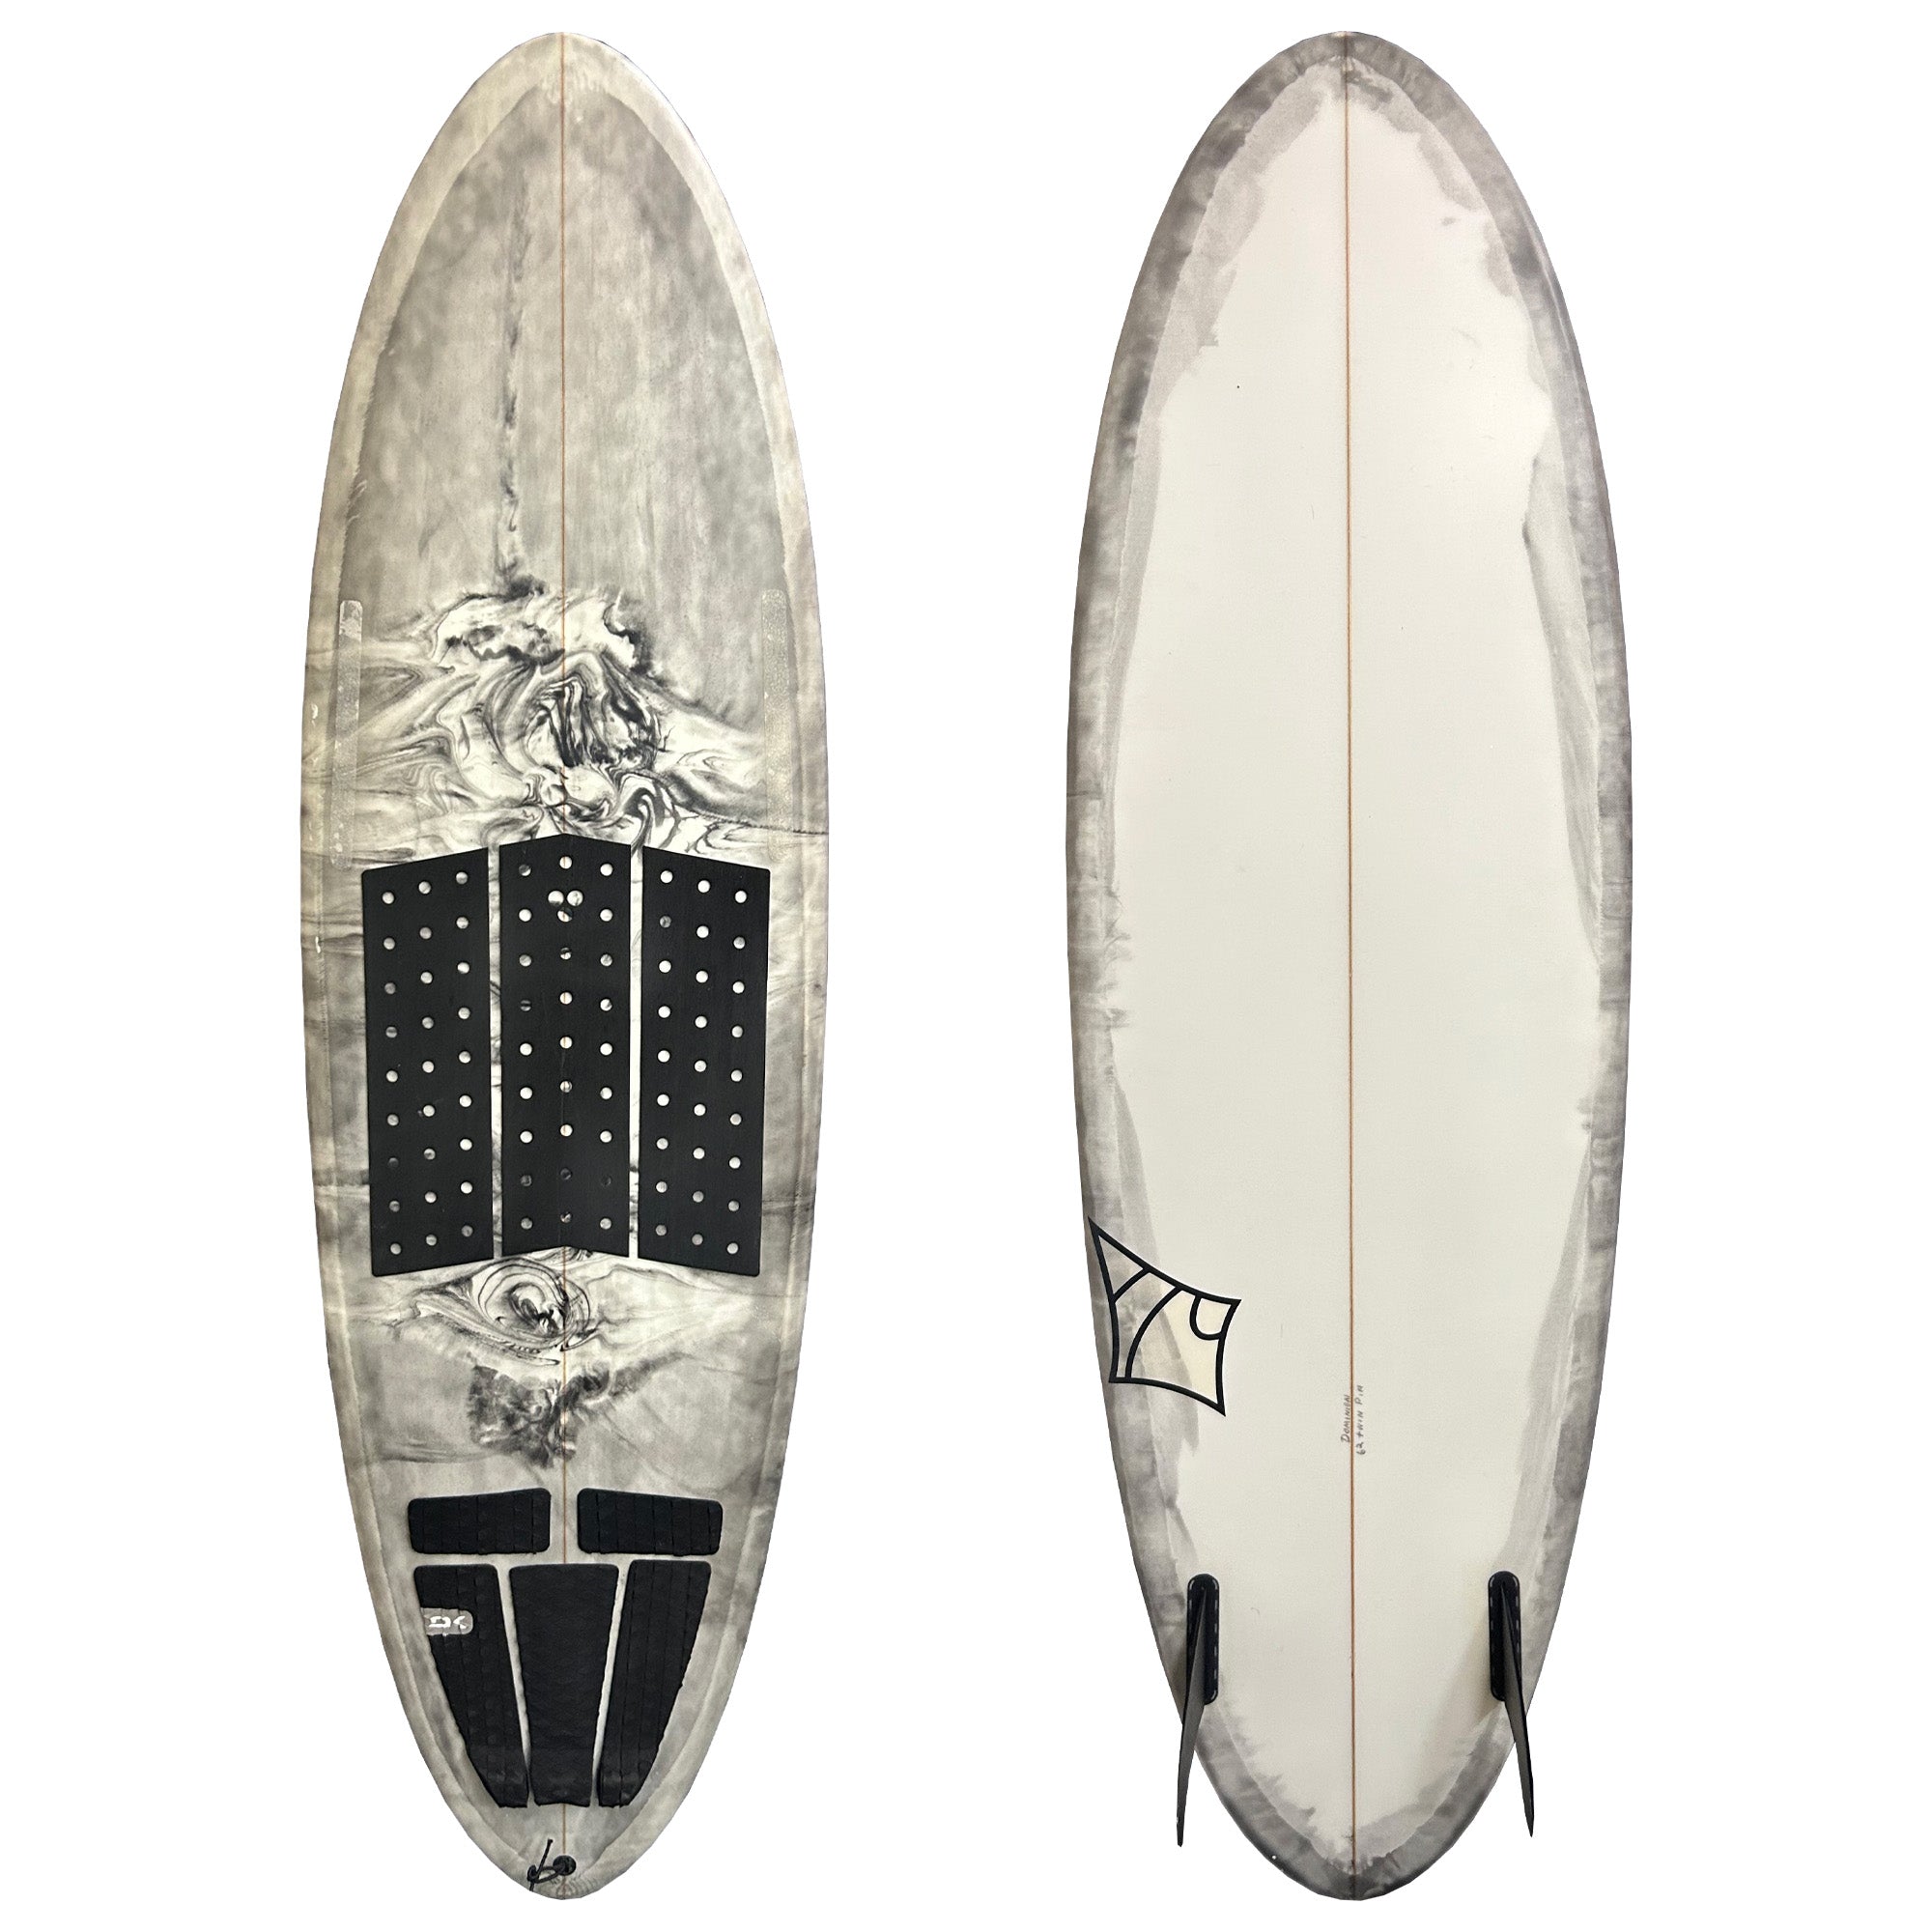 Dominion 6'2 Consignment Surfboard